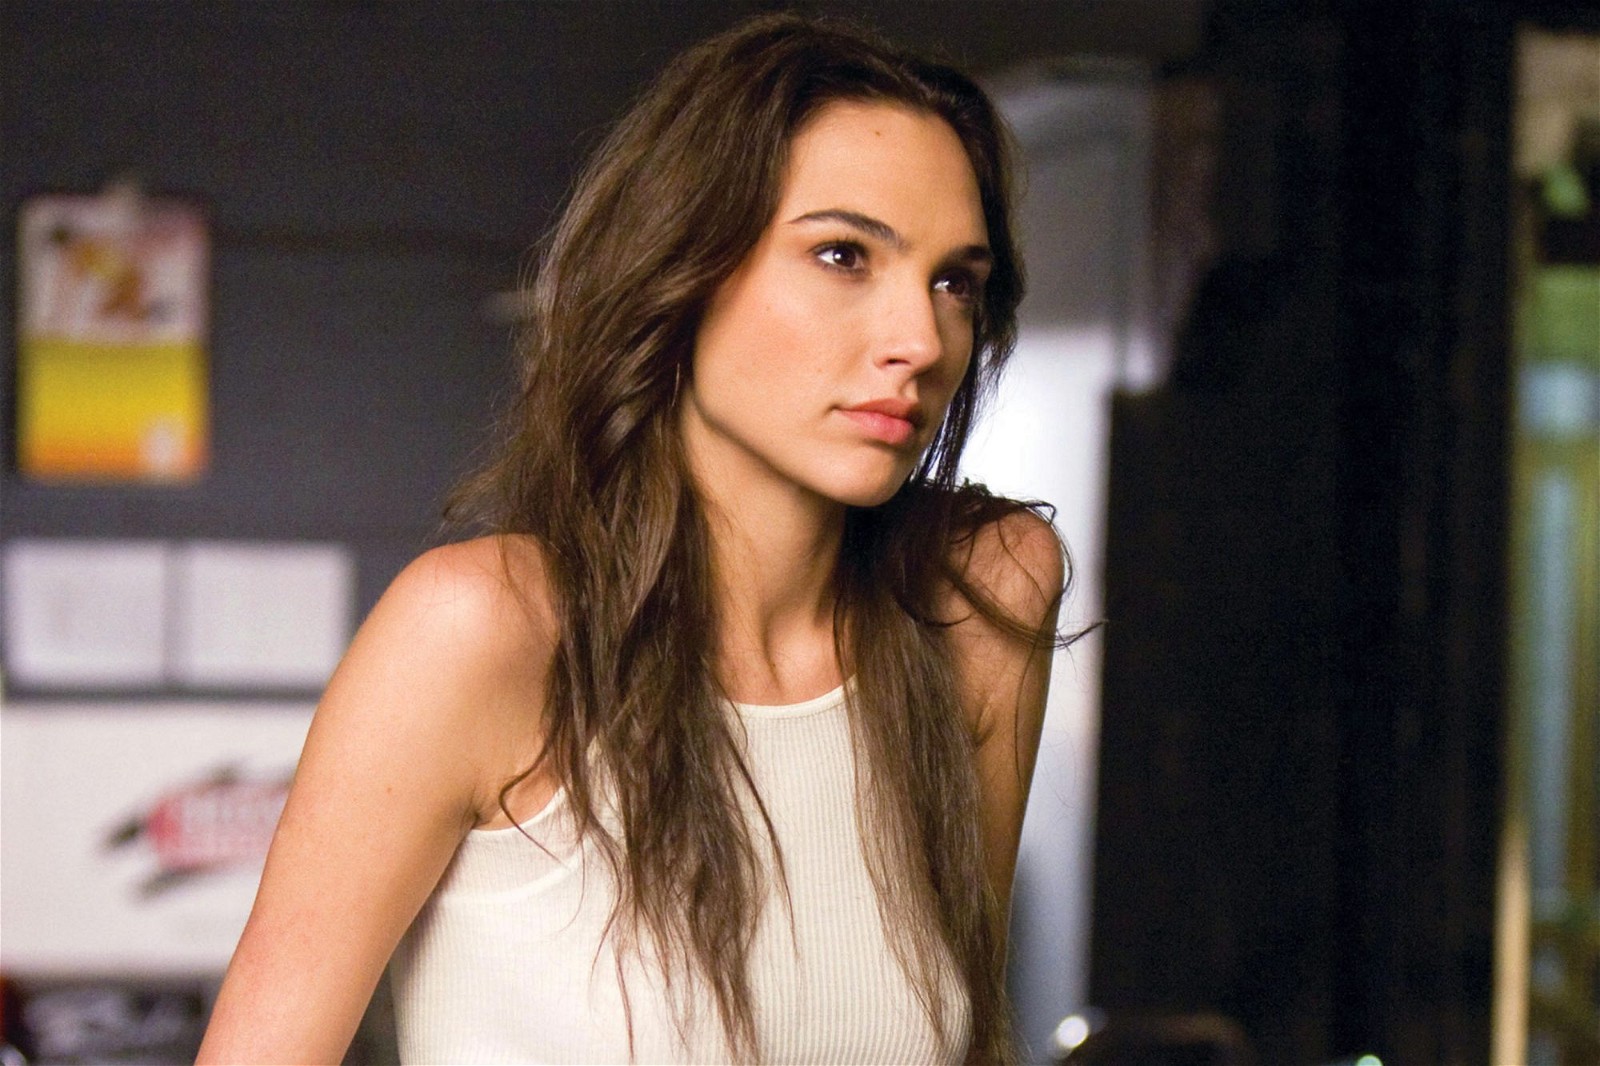 Gal Gadot as Gisele in the Fast & Furious franchise.